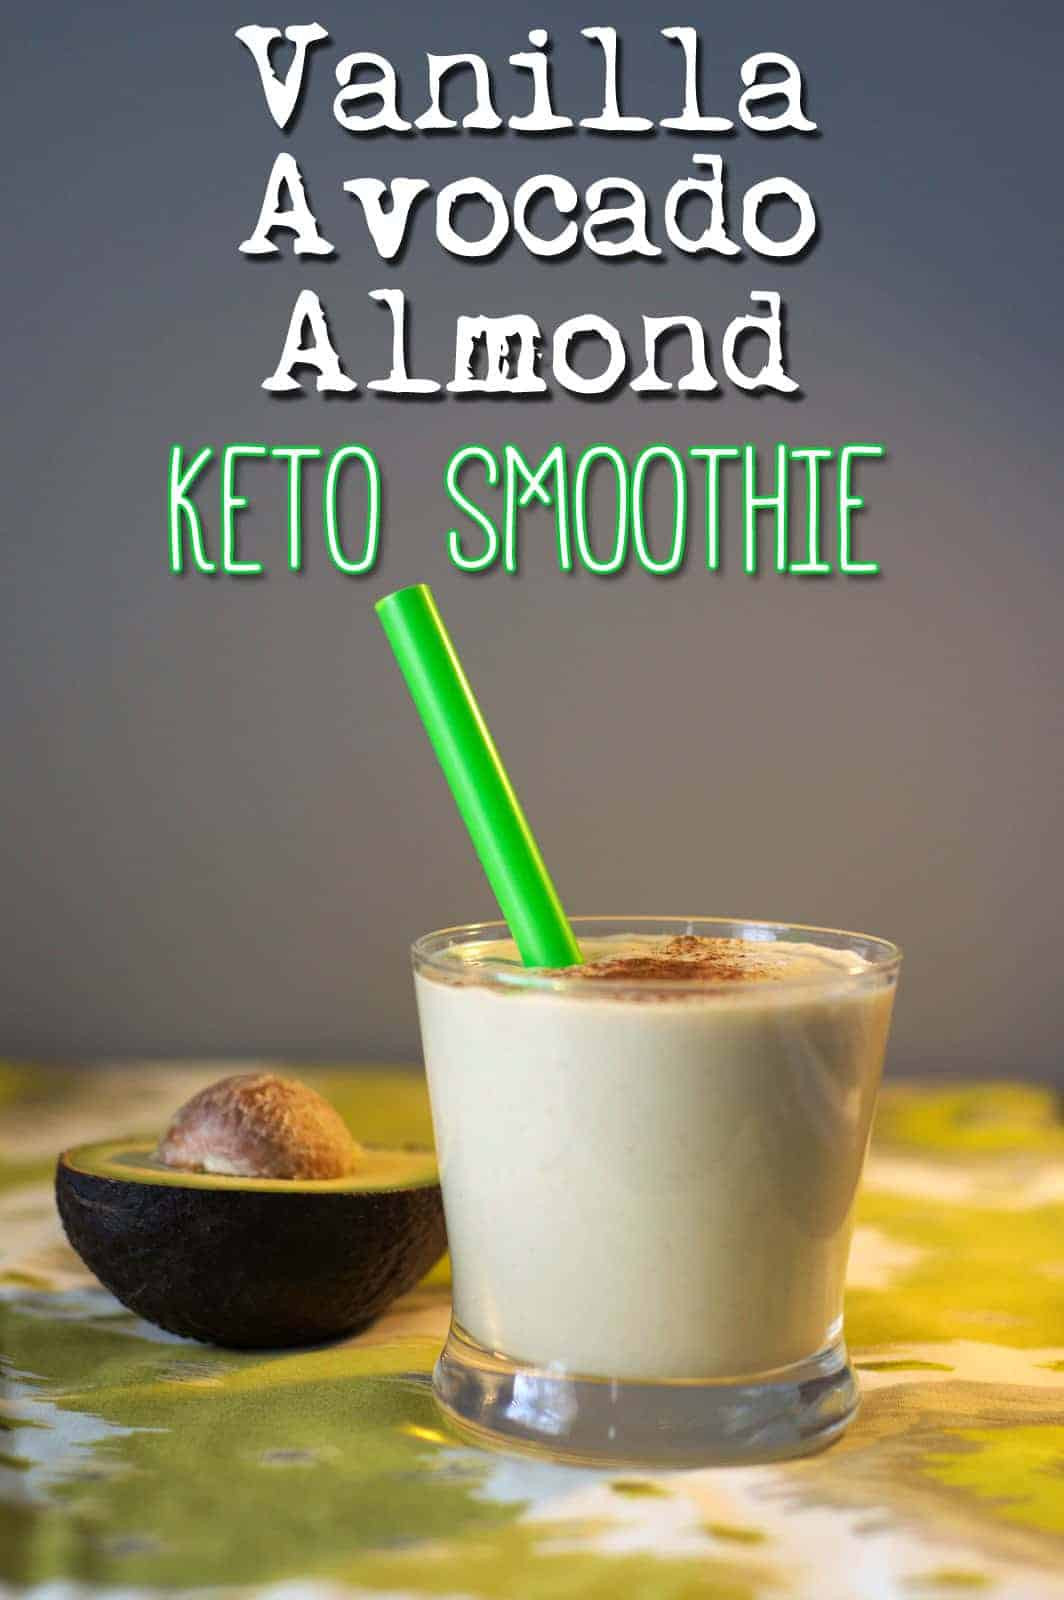 Low Carb Low Calorie Smoothies
 50 Best Low Carb Smoothie Recipes for 2018